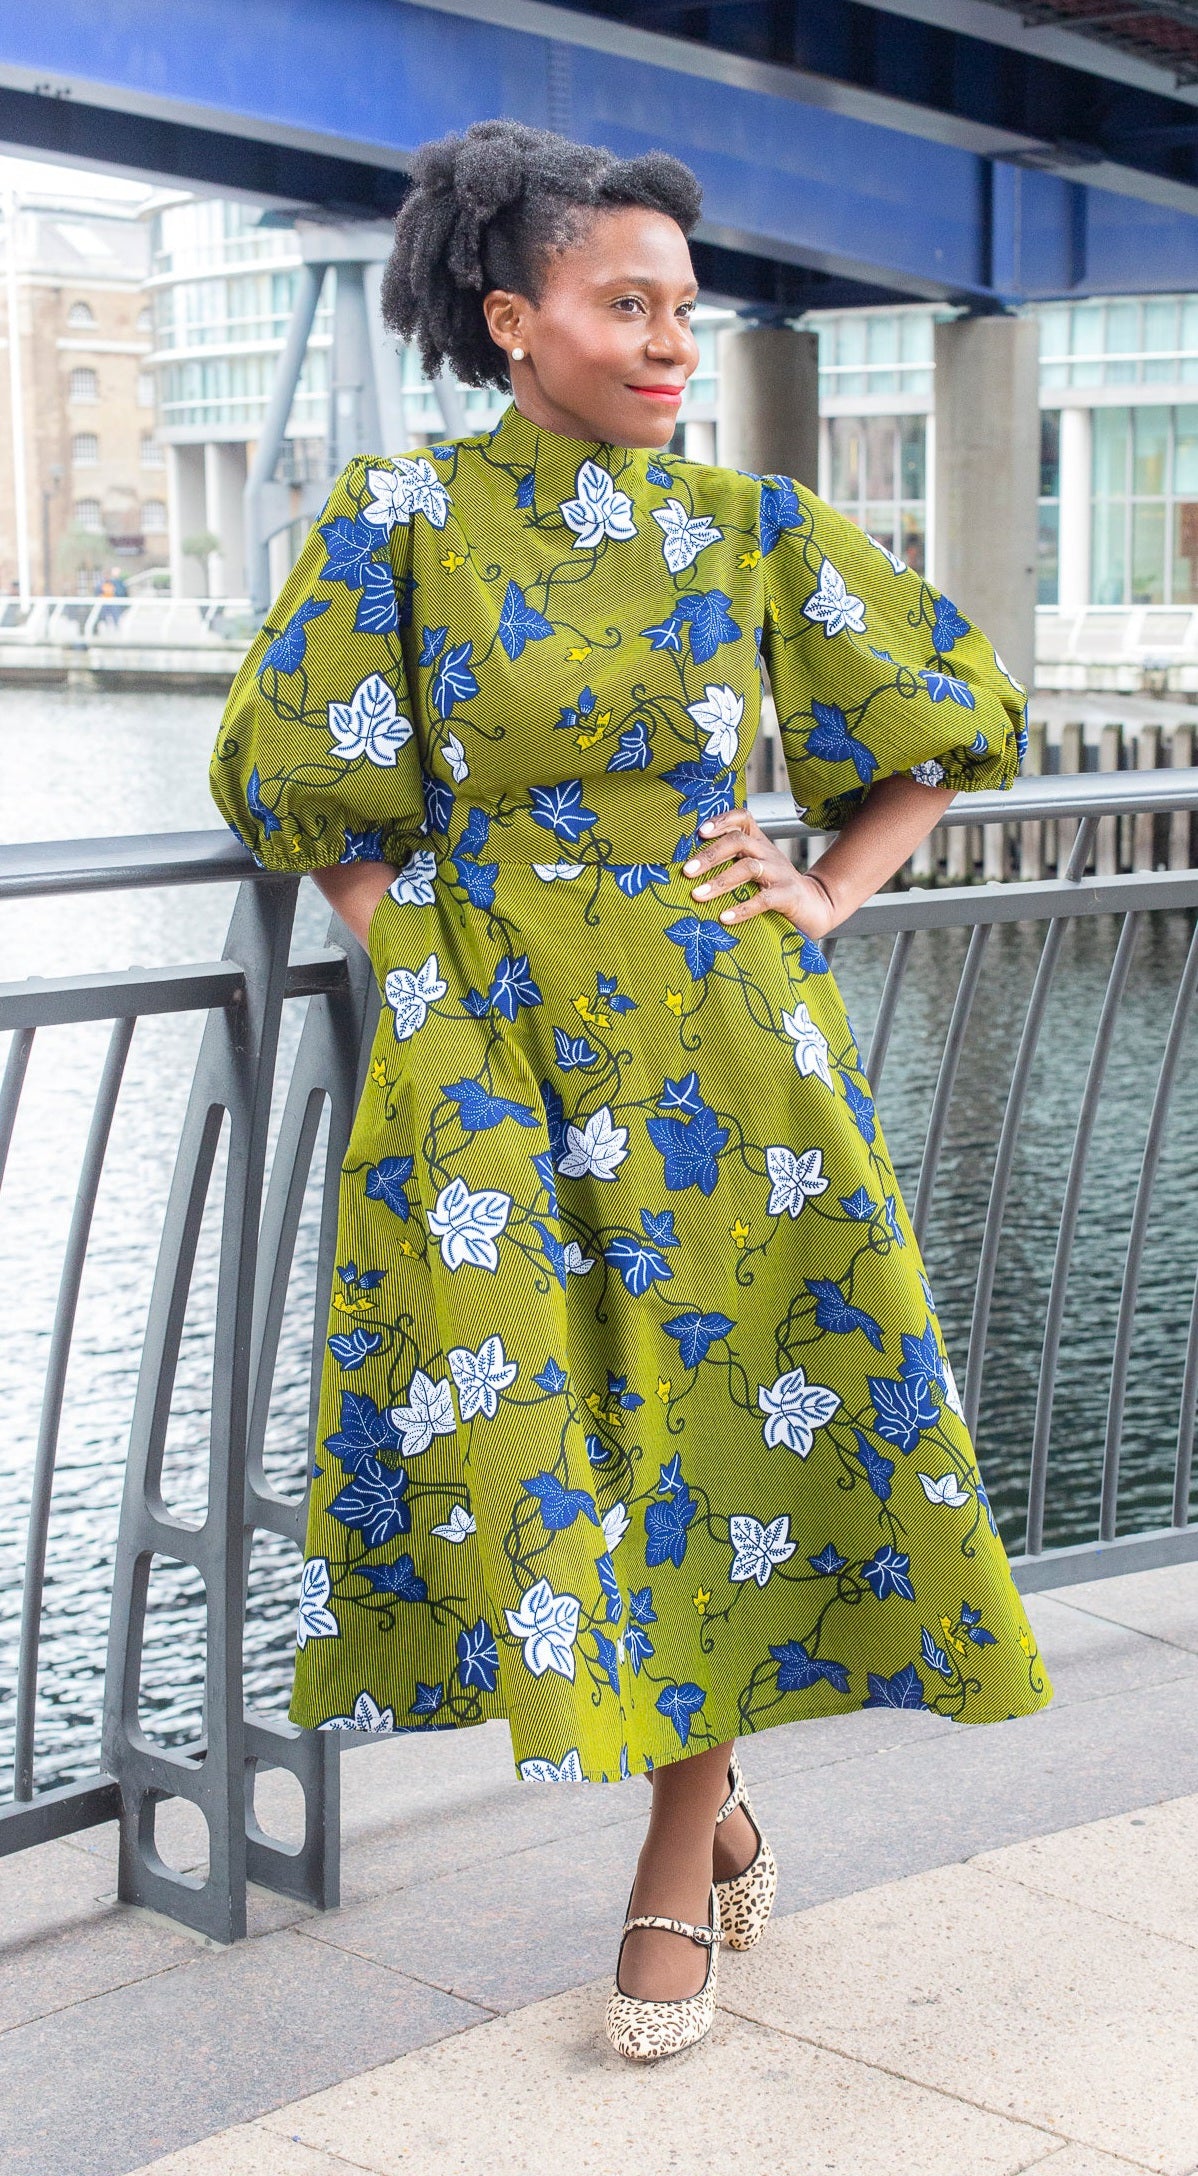 A woman confidently poses in a long khaki dress adorned with detailed blue and white leaves.